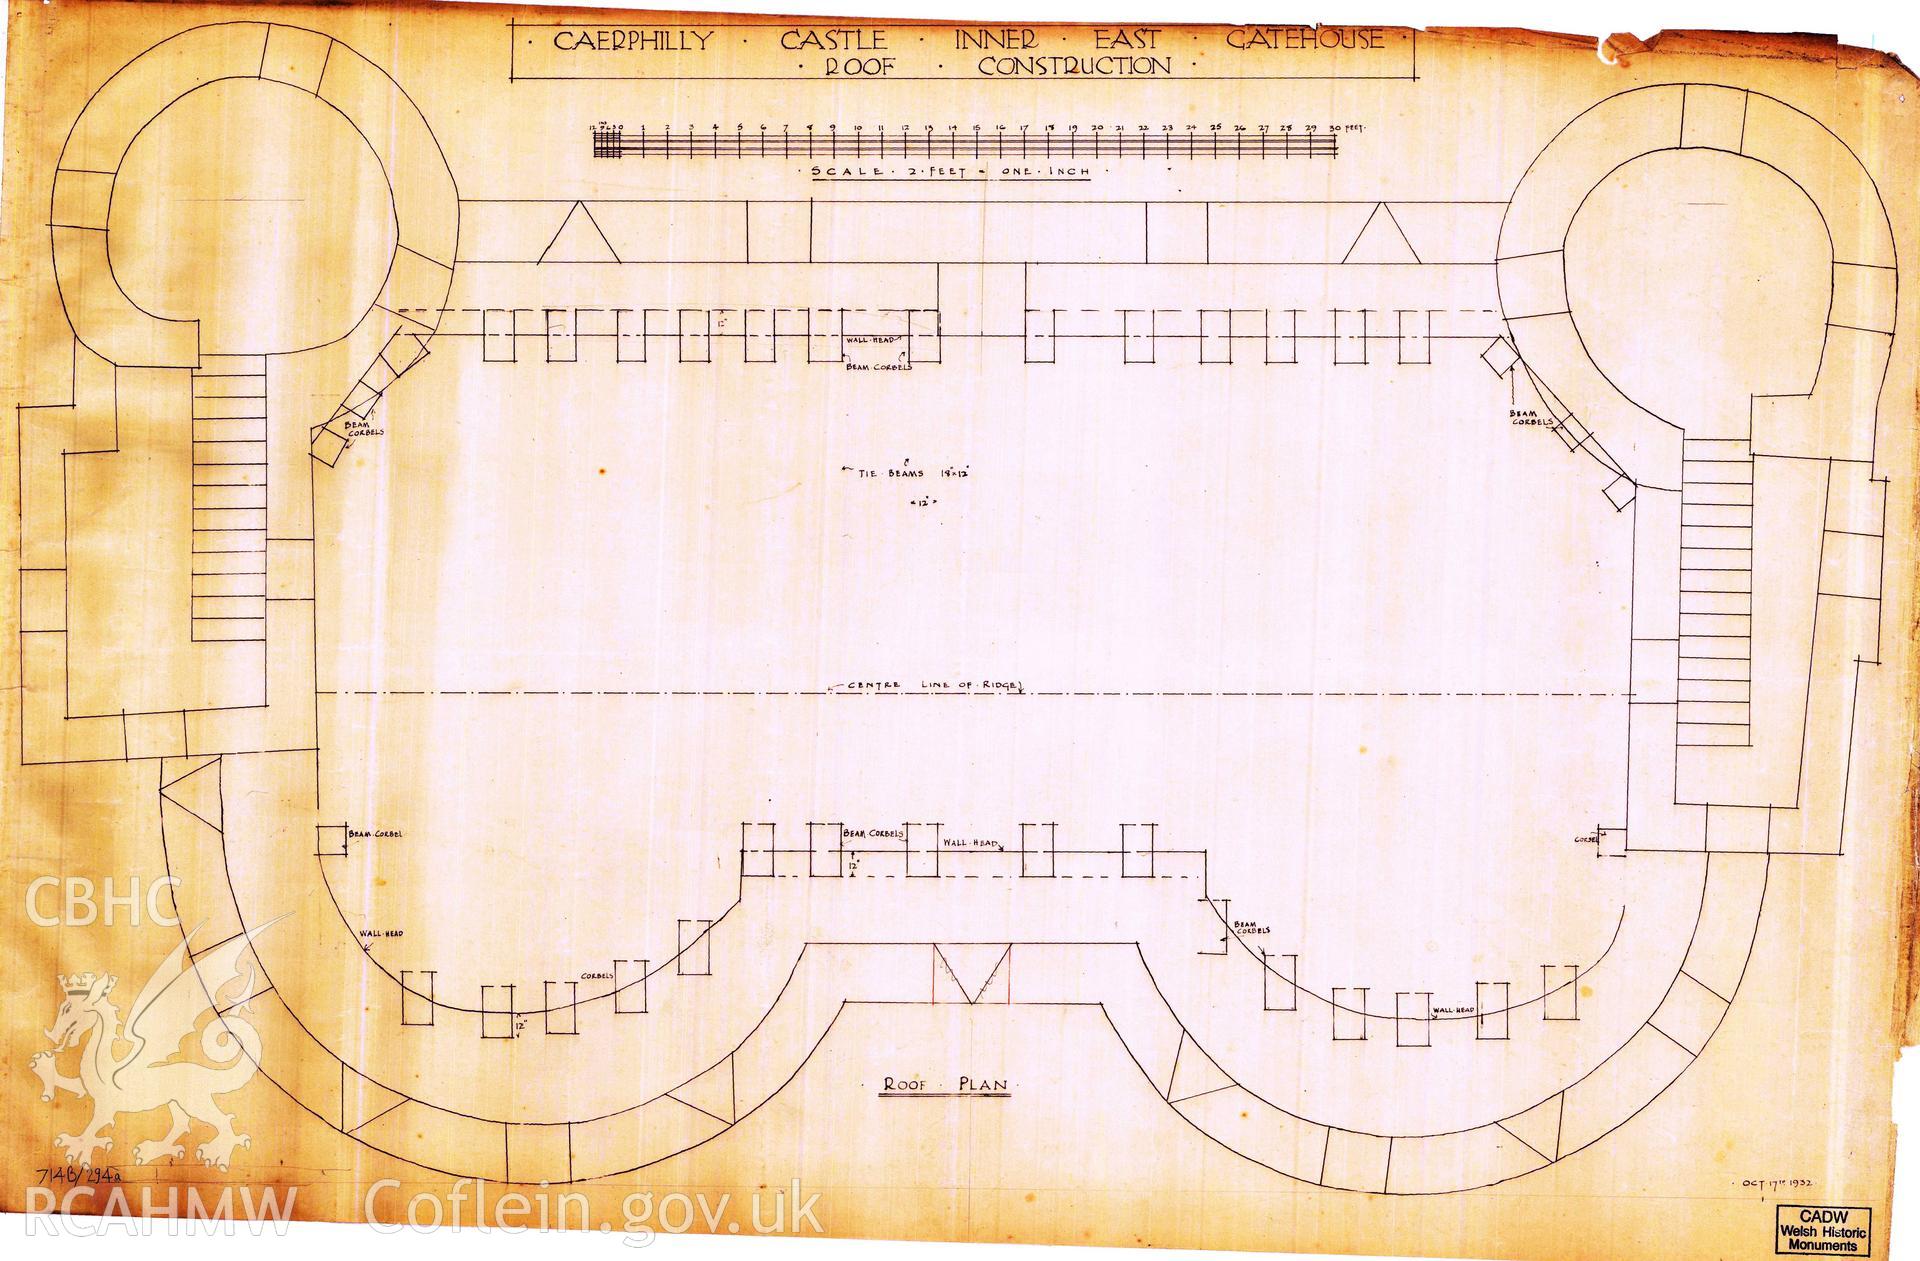 Cadw guardianship monument drawing of Caerphilly Castle. Inner E gate, roof corbel plan. Cadw Ref. No:714B/294a. Scale 1:24.